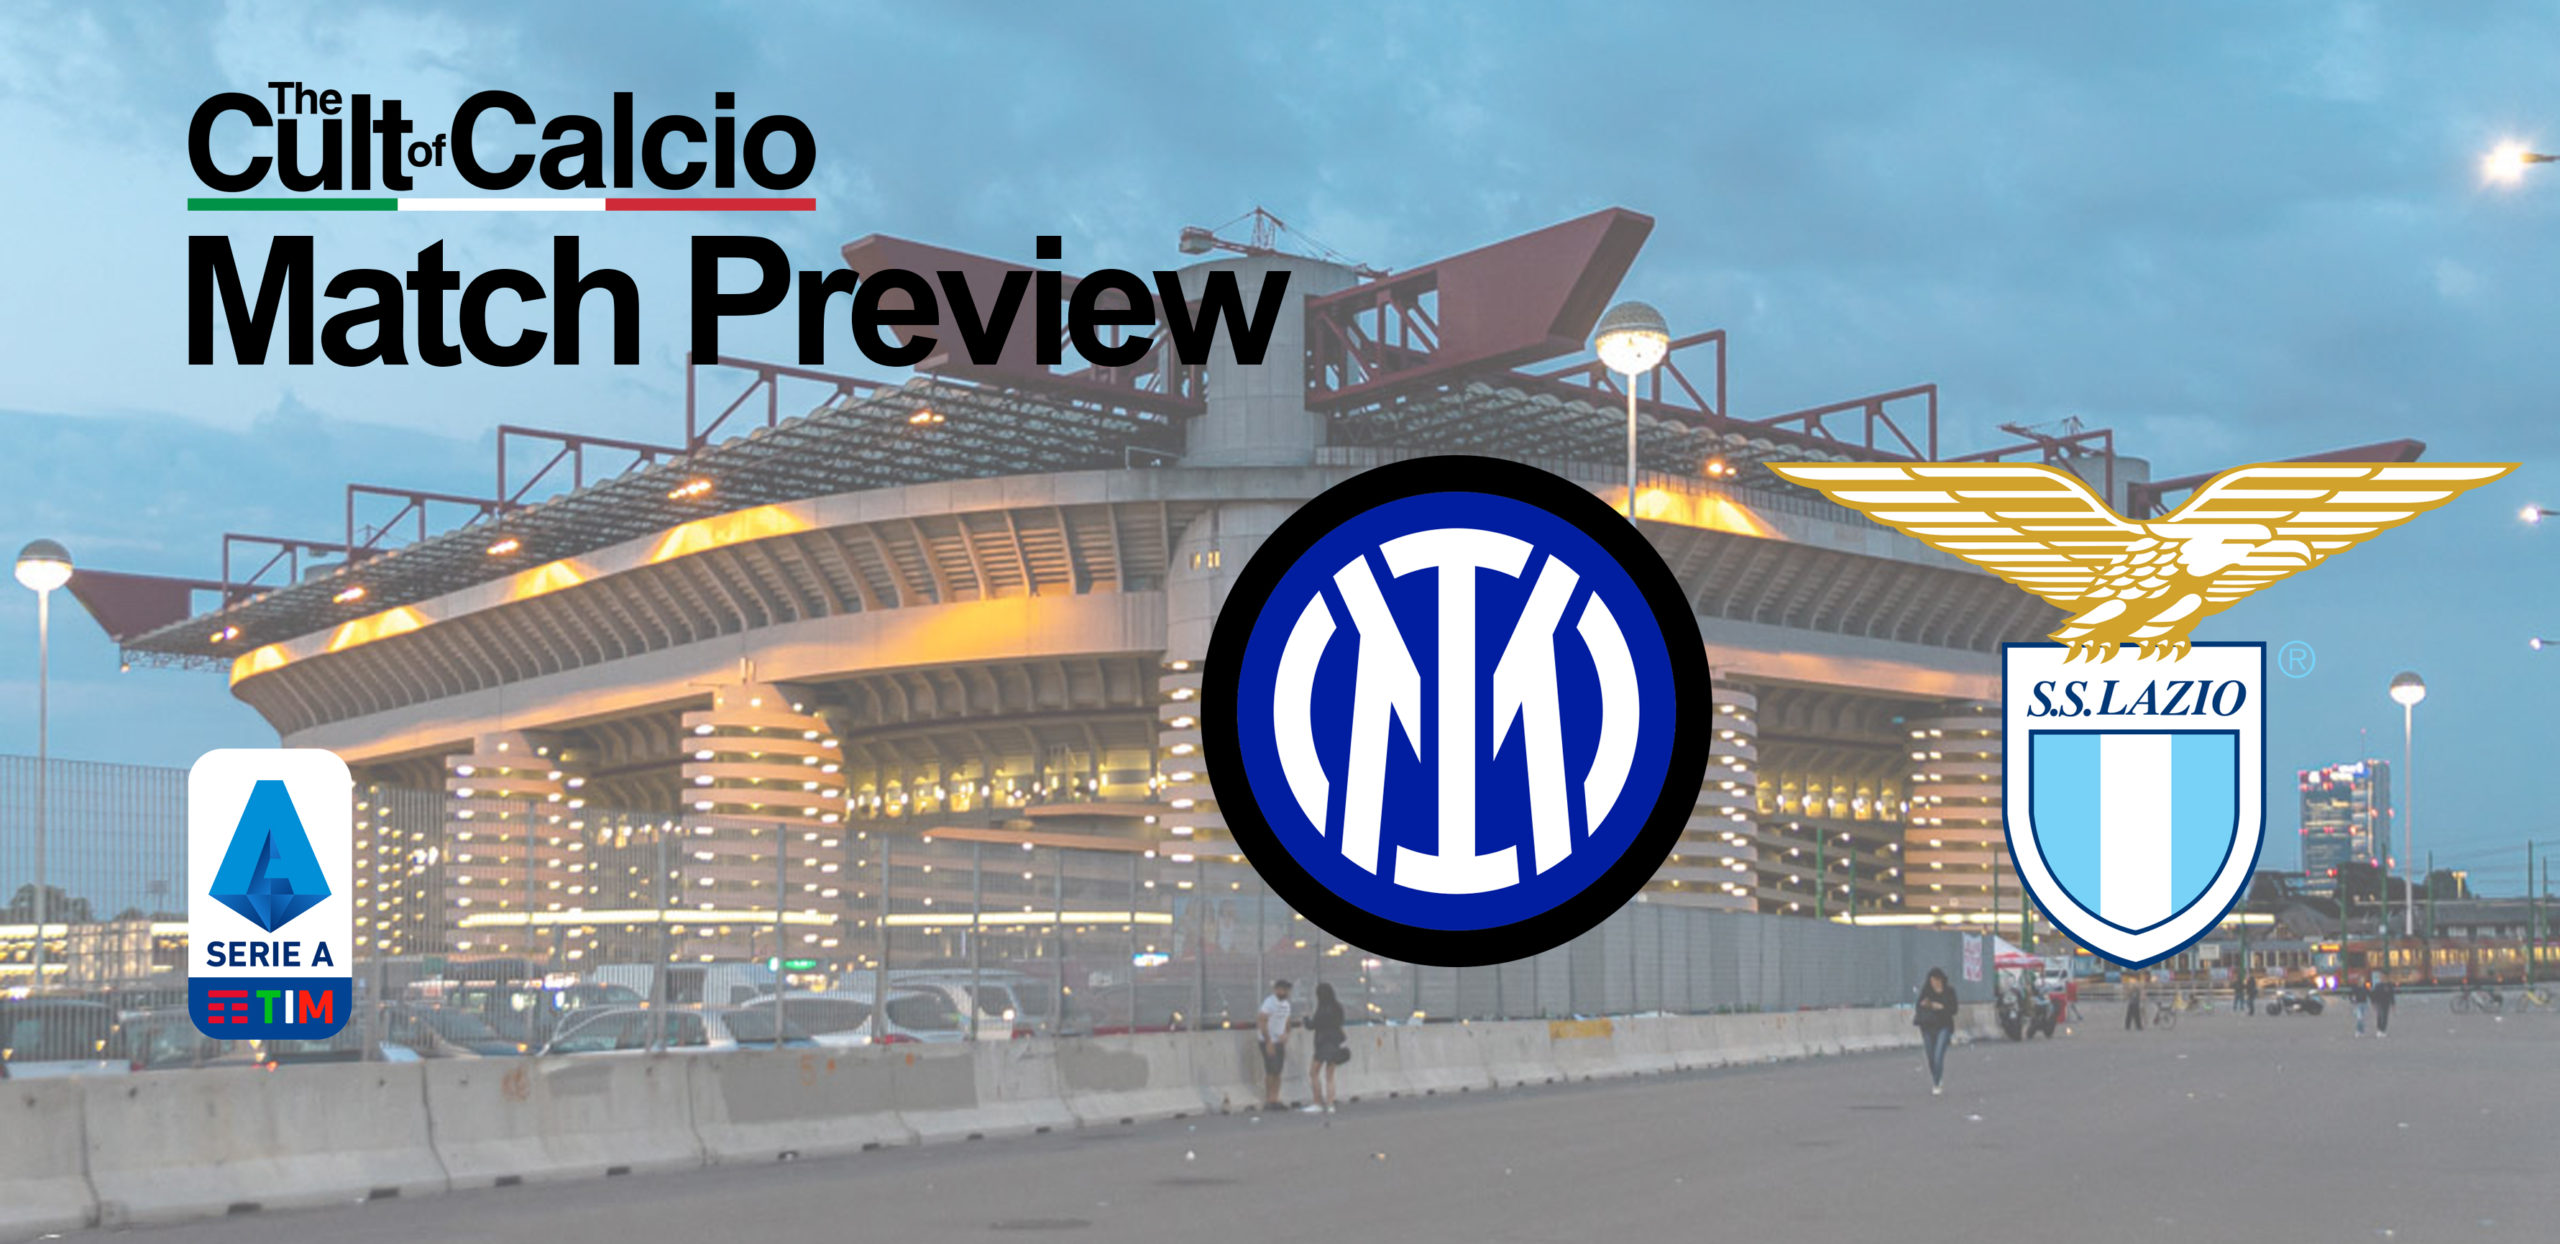 With match-week 21 of the Serie A underway, here is a preview of the matchup Inter vs Lazio along with the predicted lineups of each team